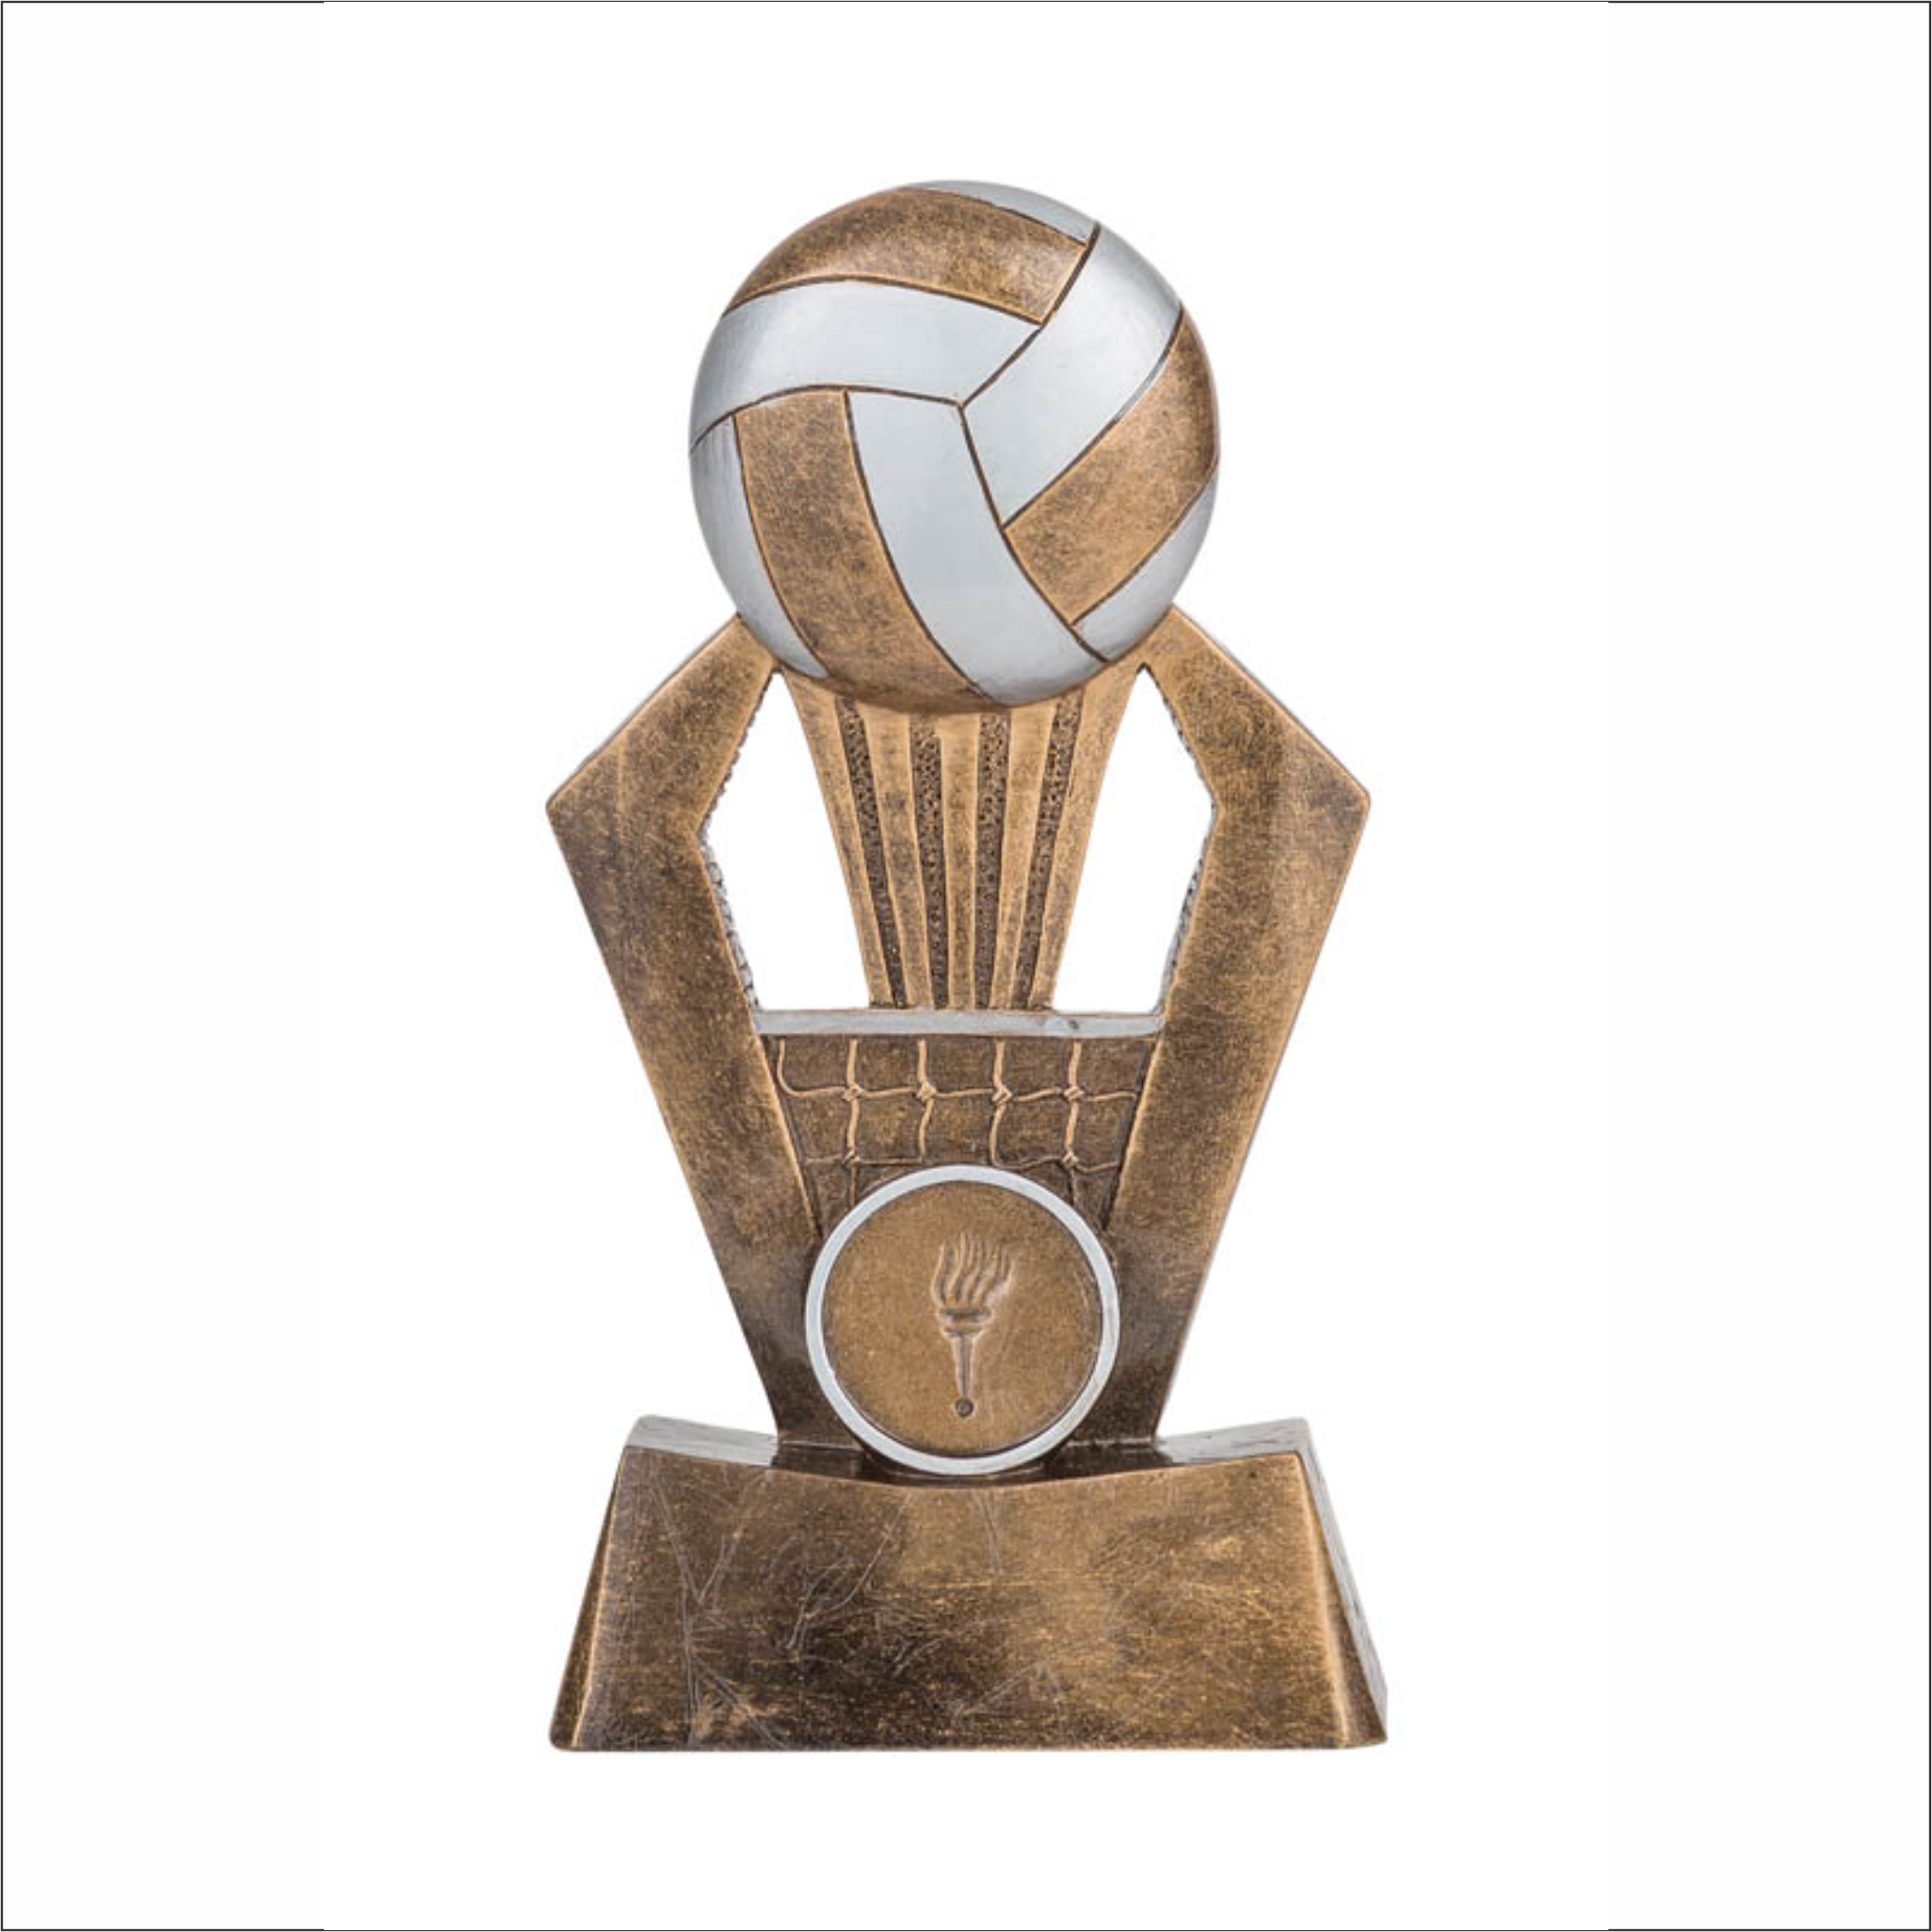 Volleyball trophy - Volcano series